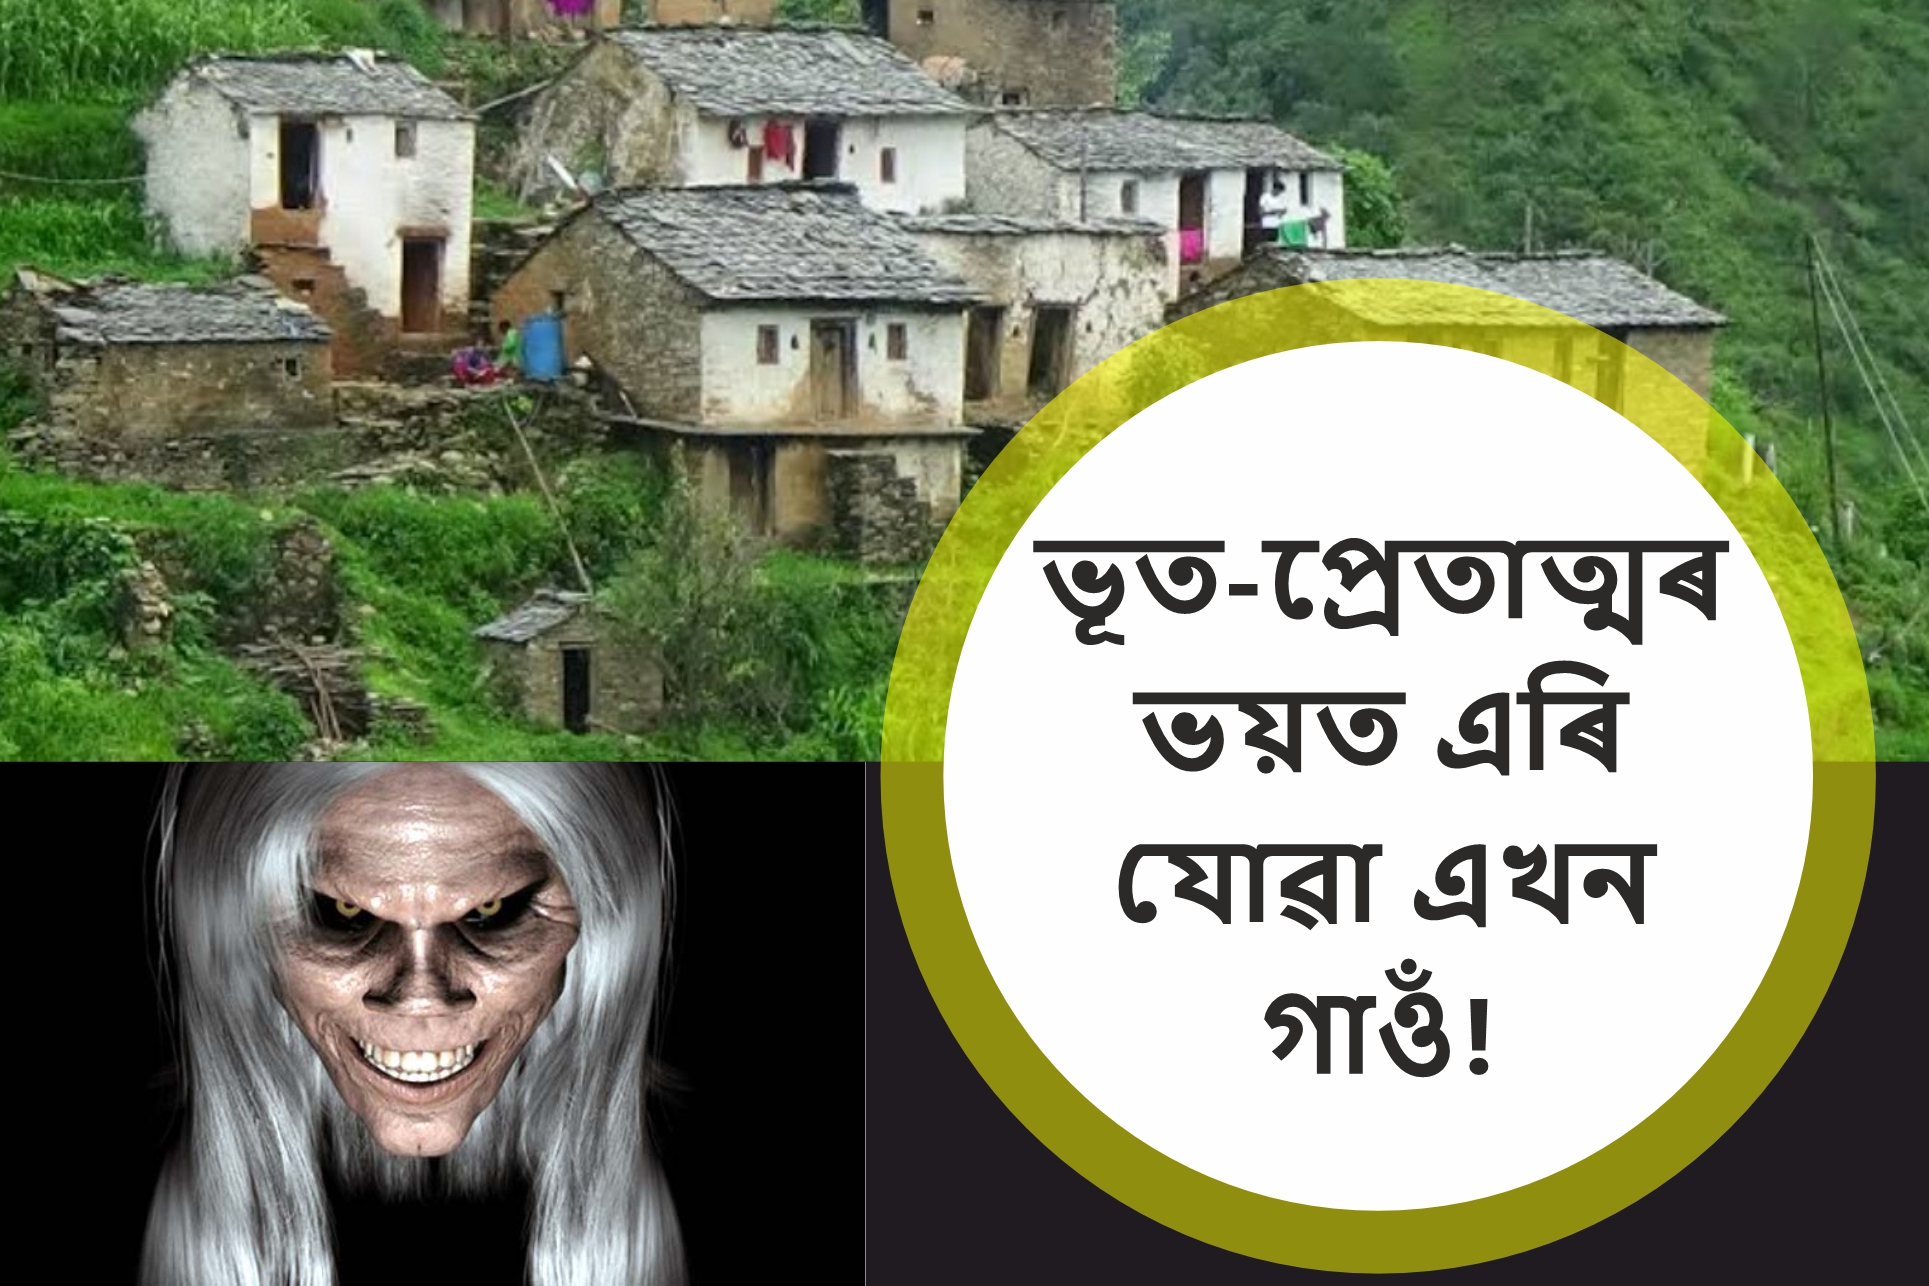 A village Uttarakhand left 20 years ago for fear of ghosts!